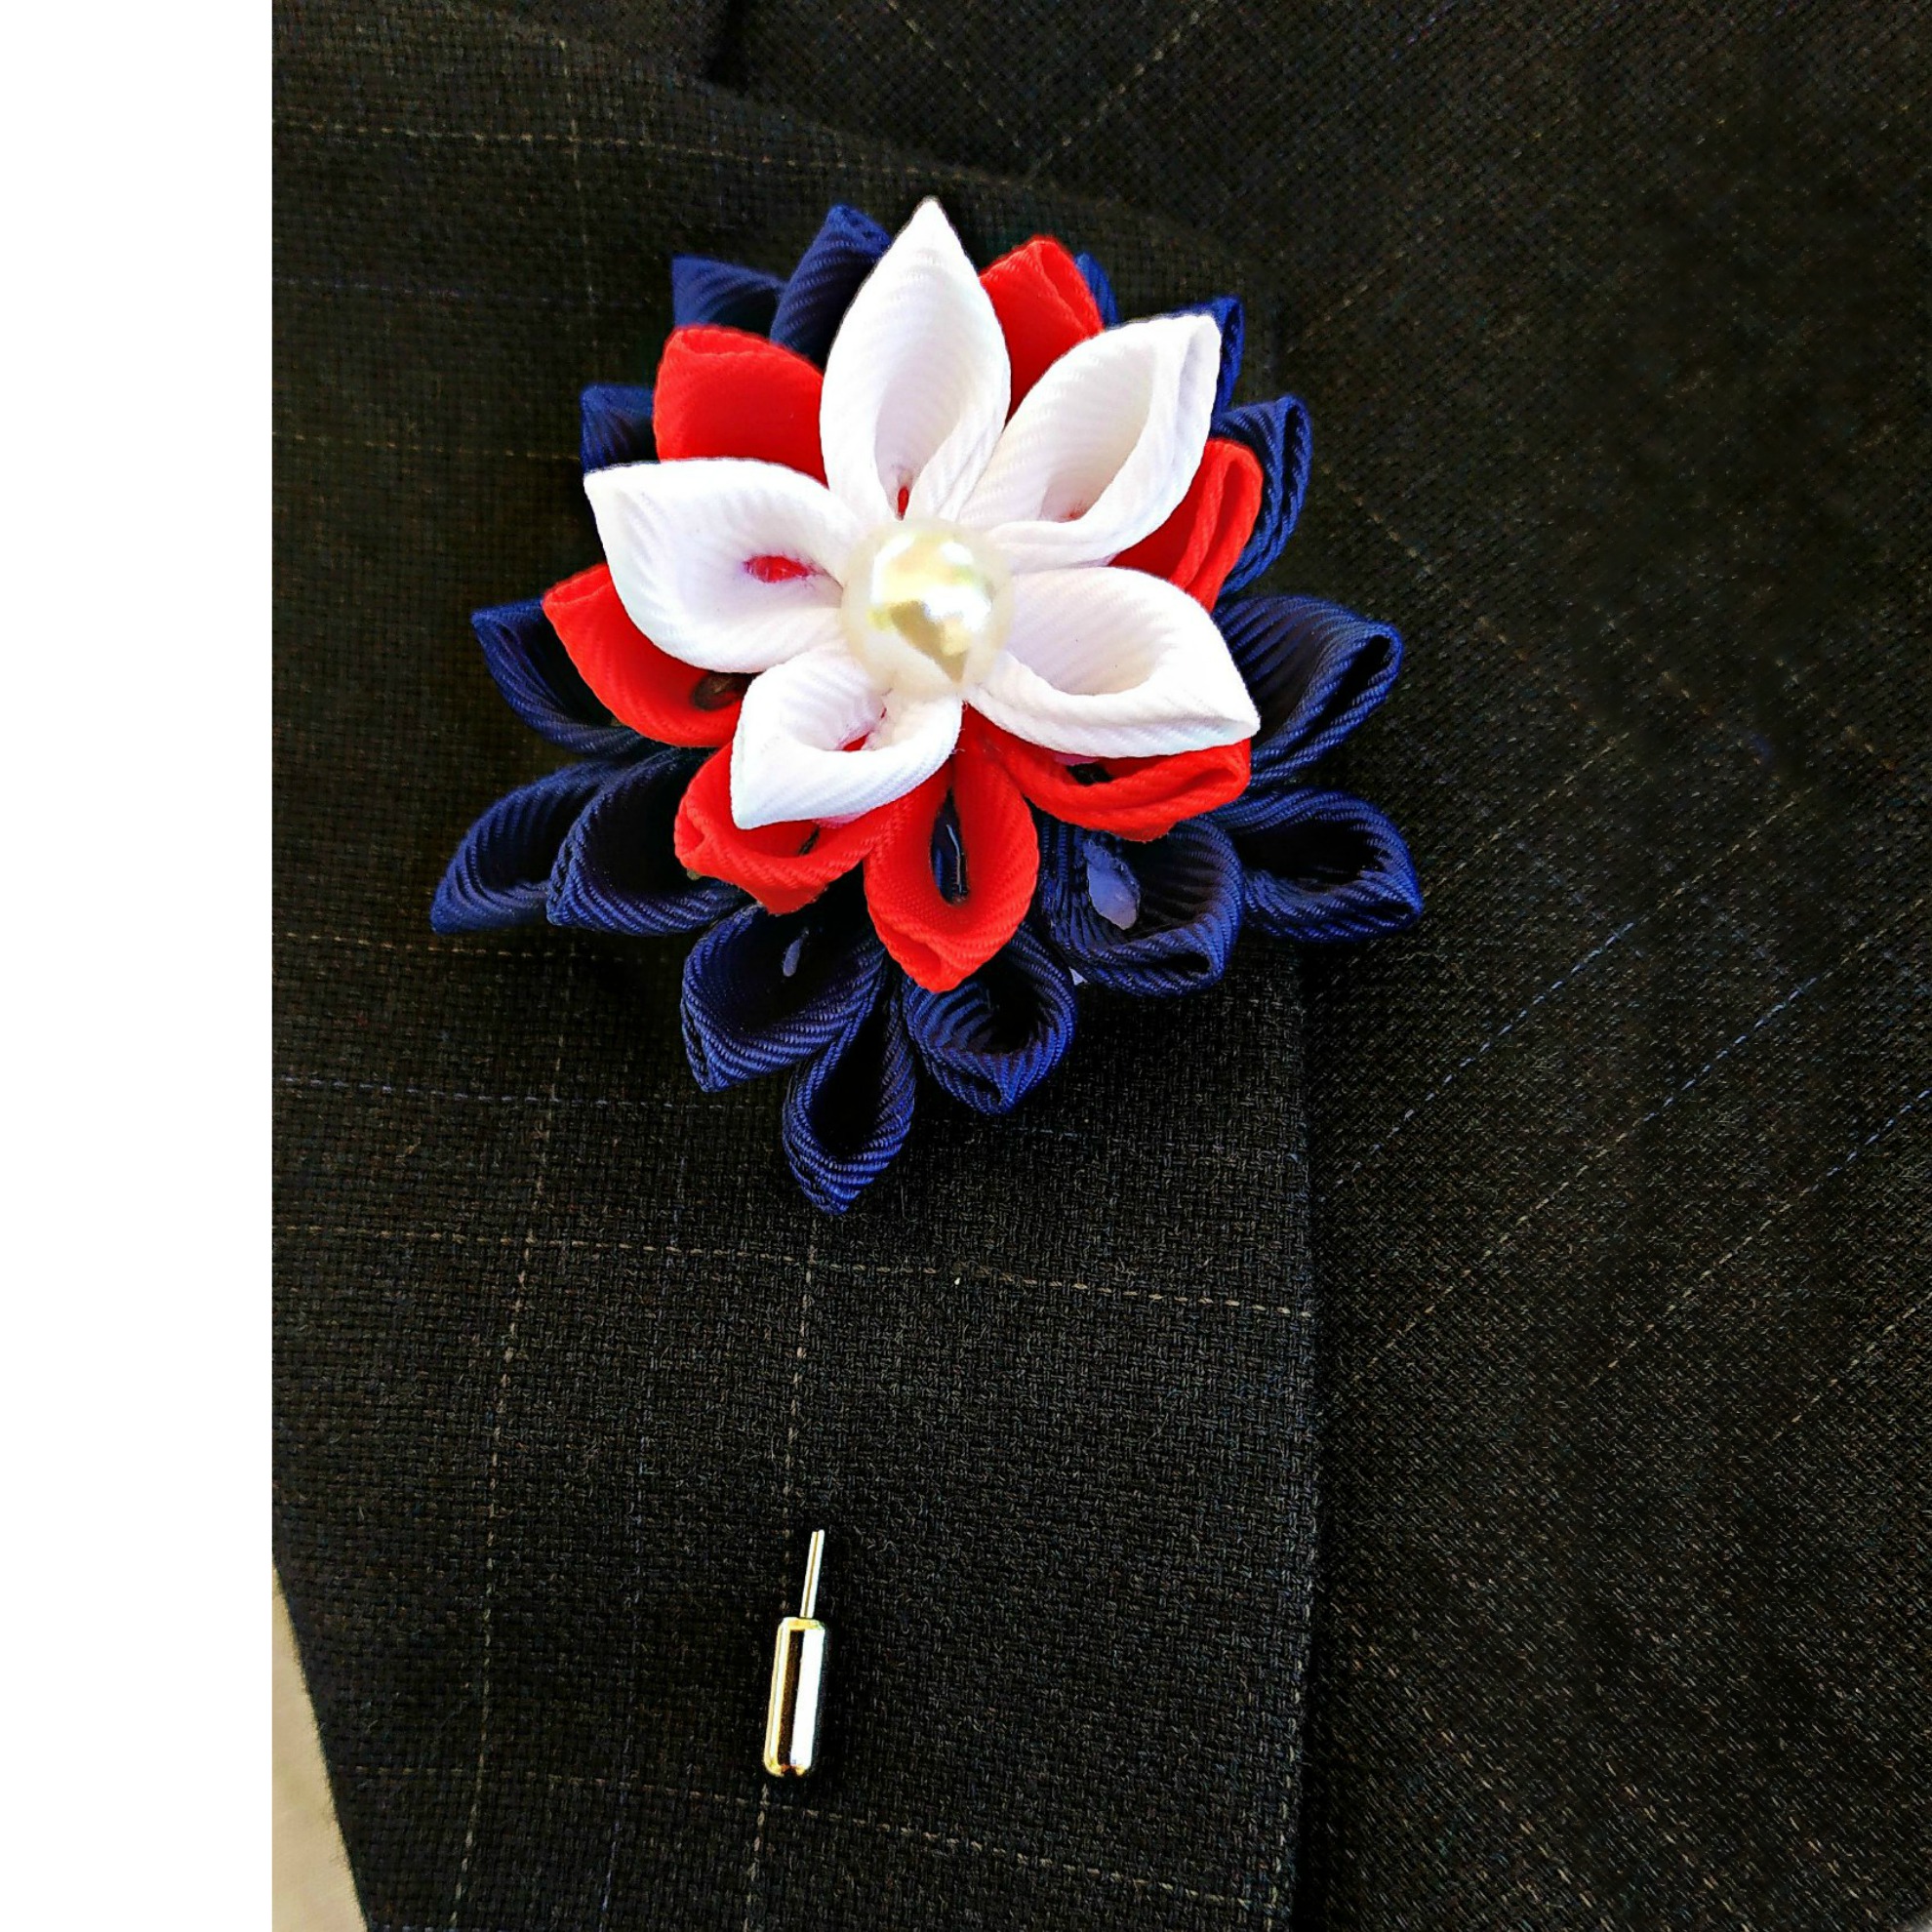 Red Faux Leather Lapel Flower Pin by The Accessorized Man 